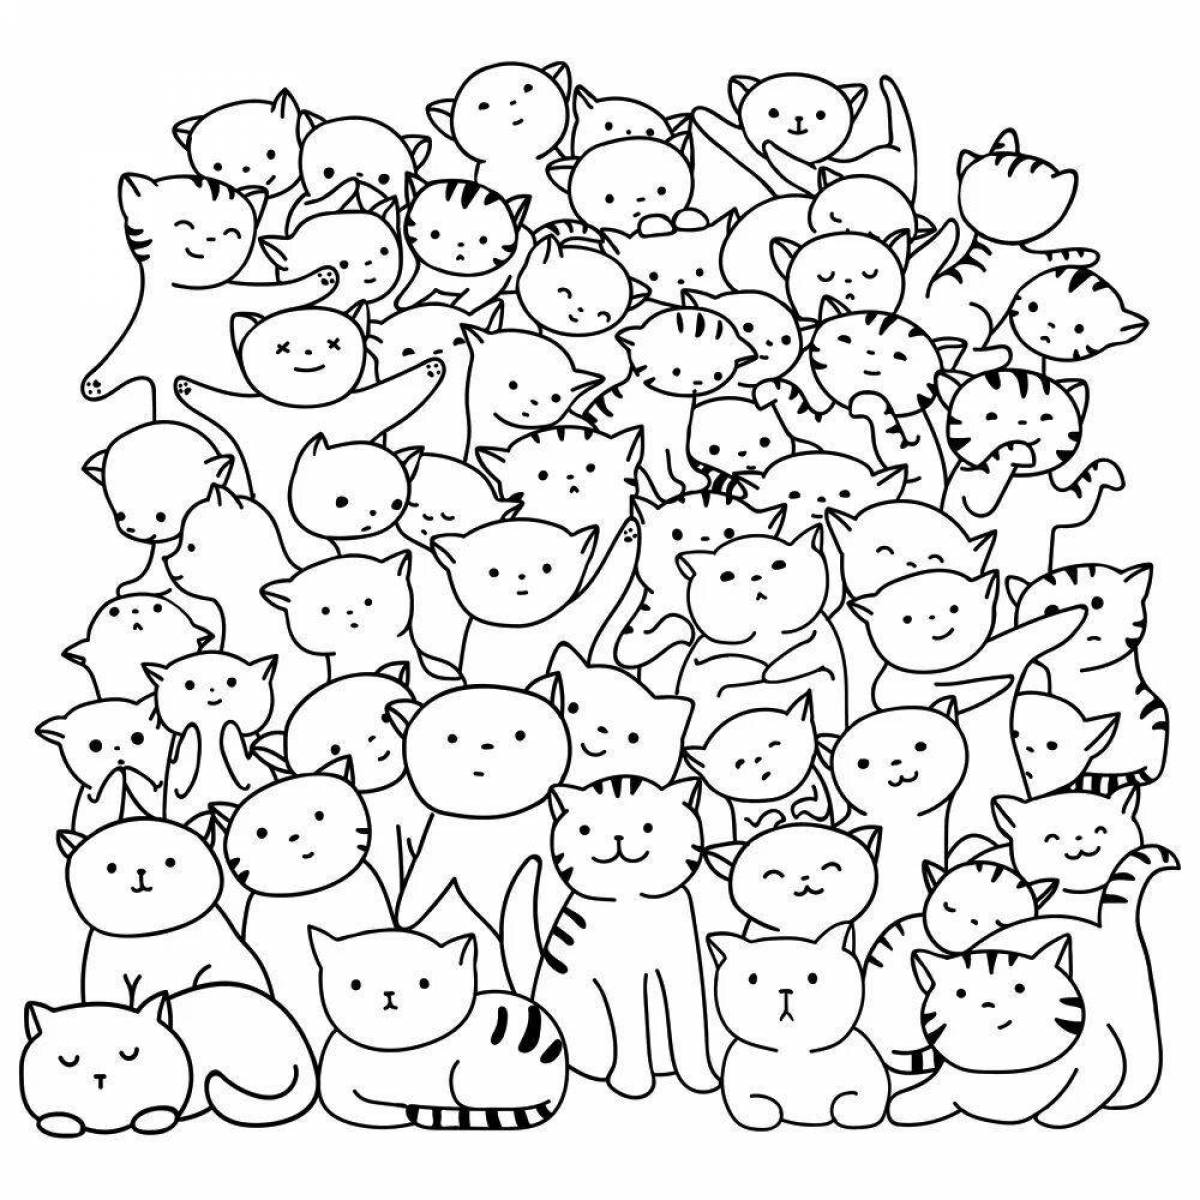 Amazing many cats on one page